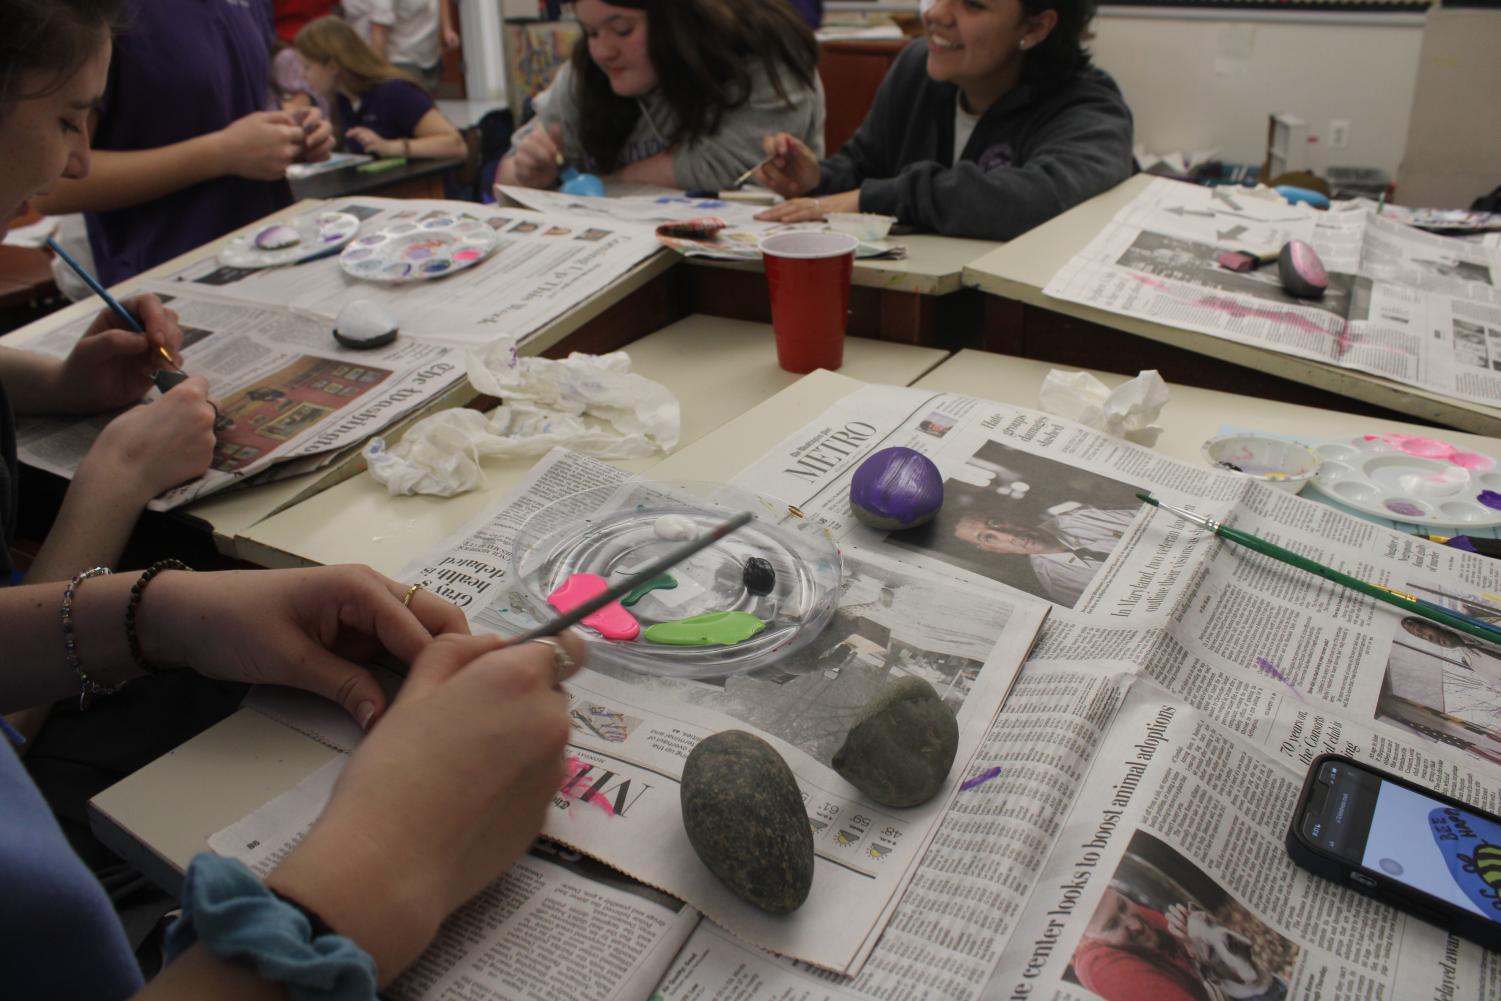 Kindness Rocks being painted by students.